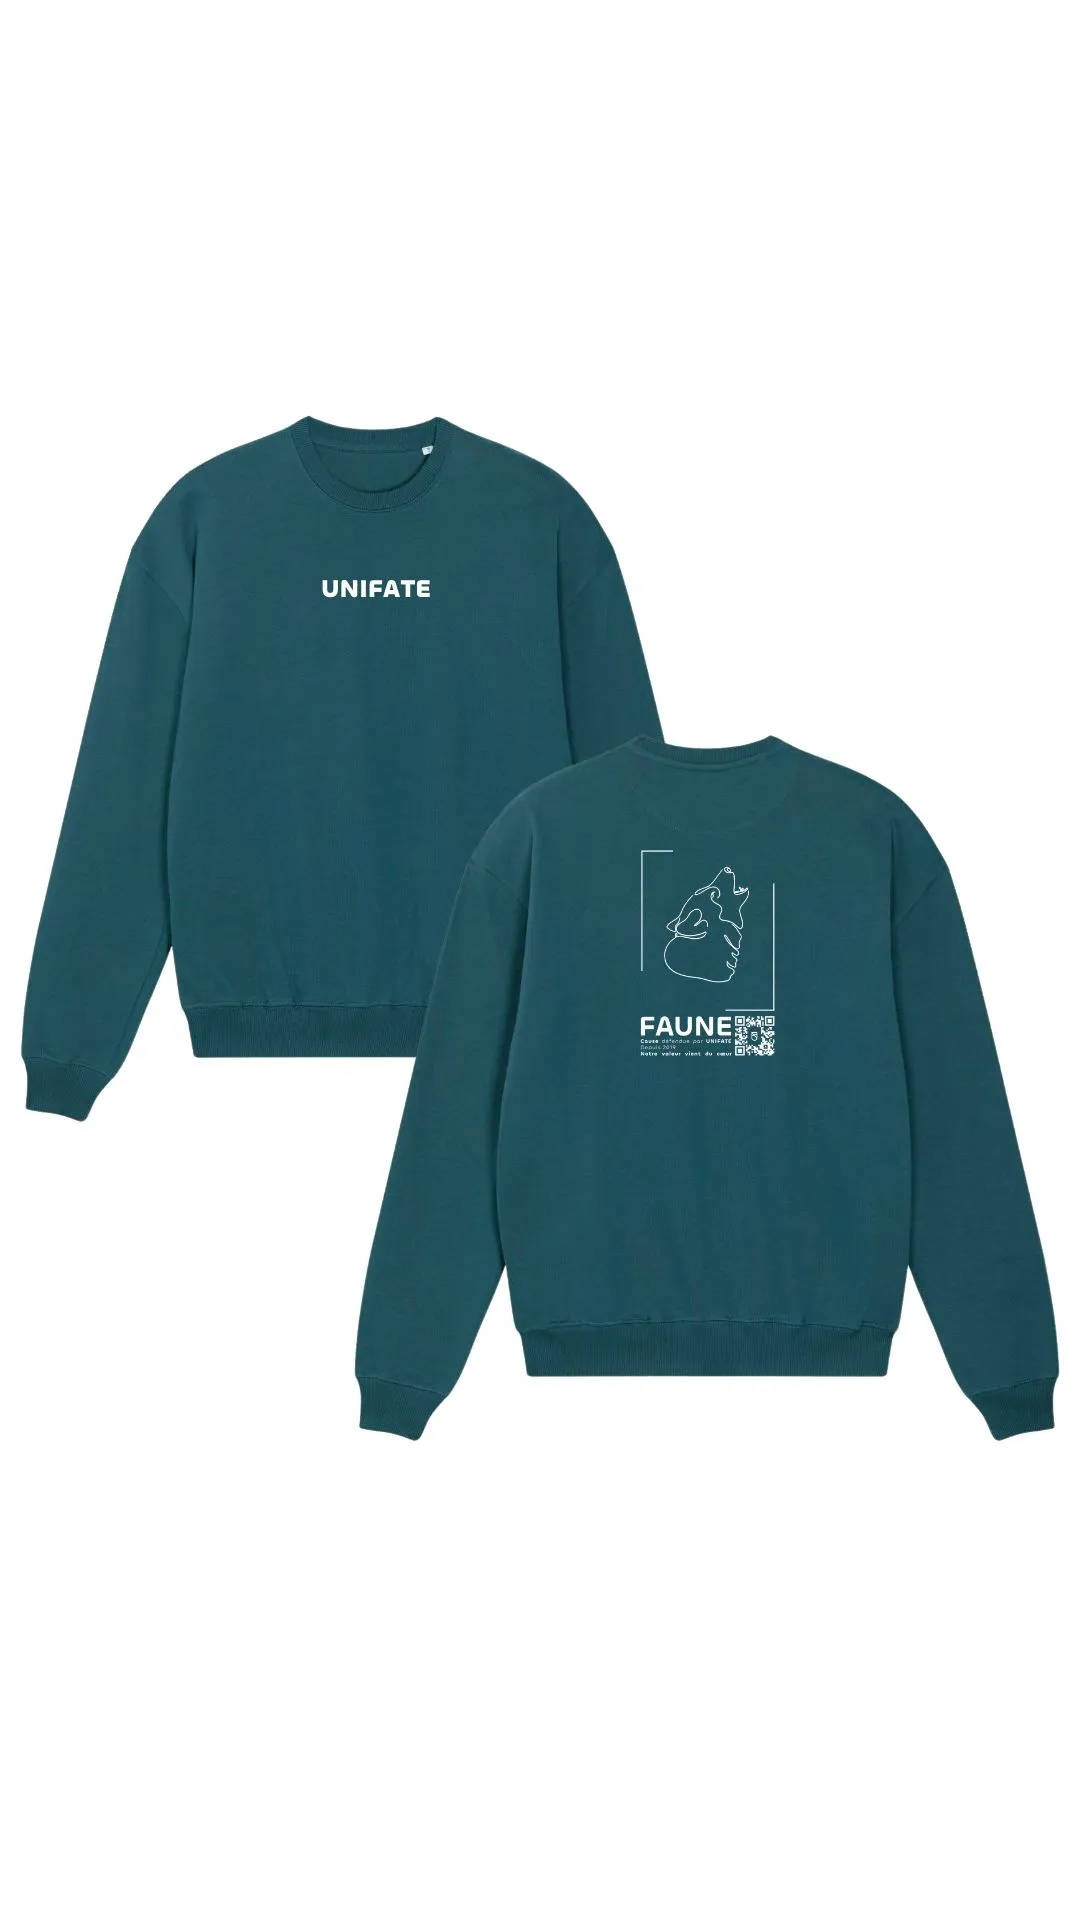 unifate-marque-responsable-rennes-collection-faune-ete-sweat-turquoise